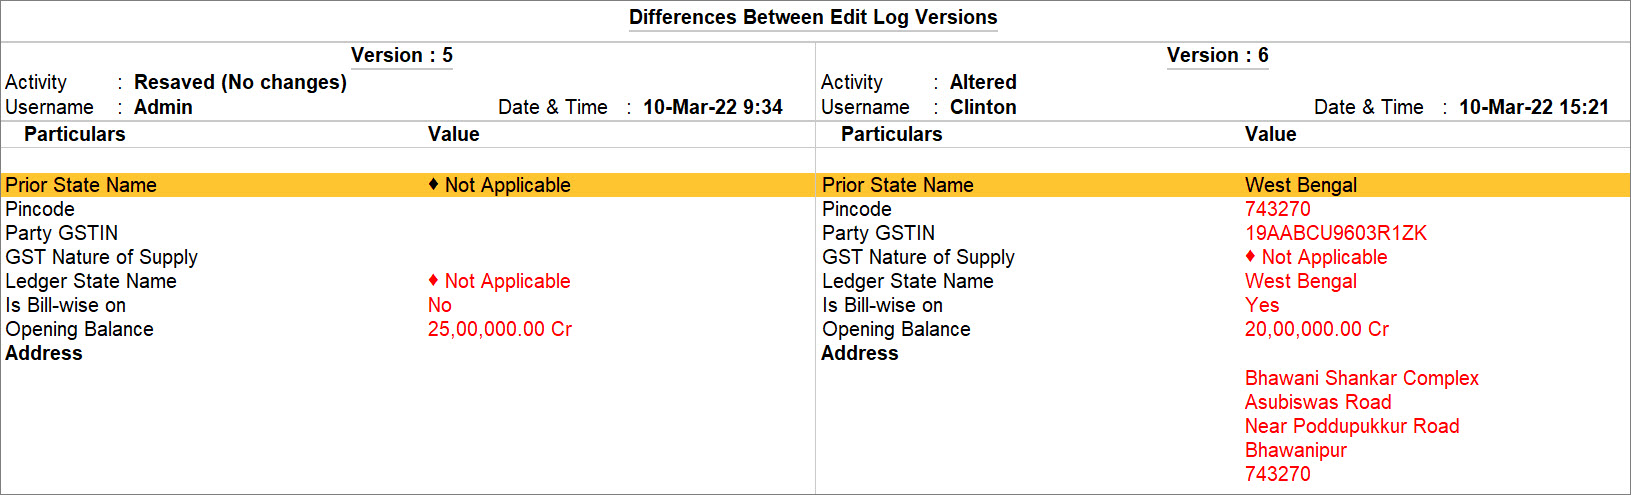 Differences Between Edit Log Versions Report After Configuring in TallyPrime with Edit Log